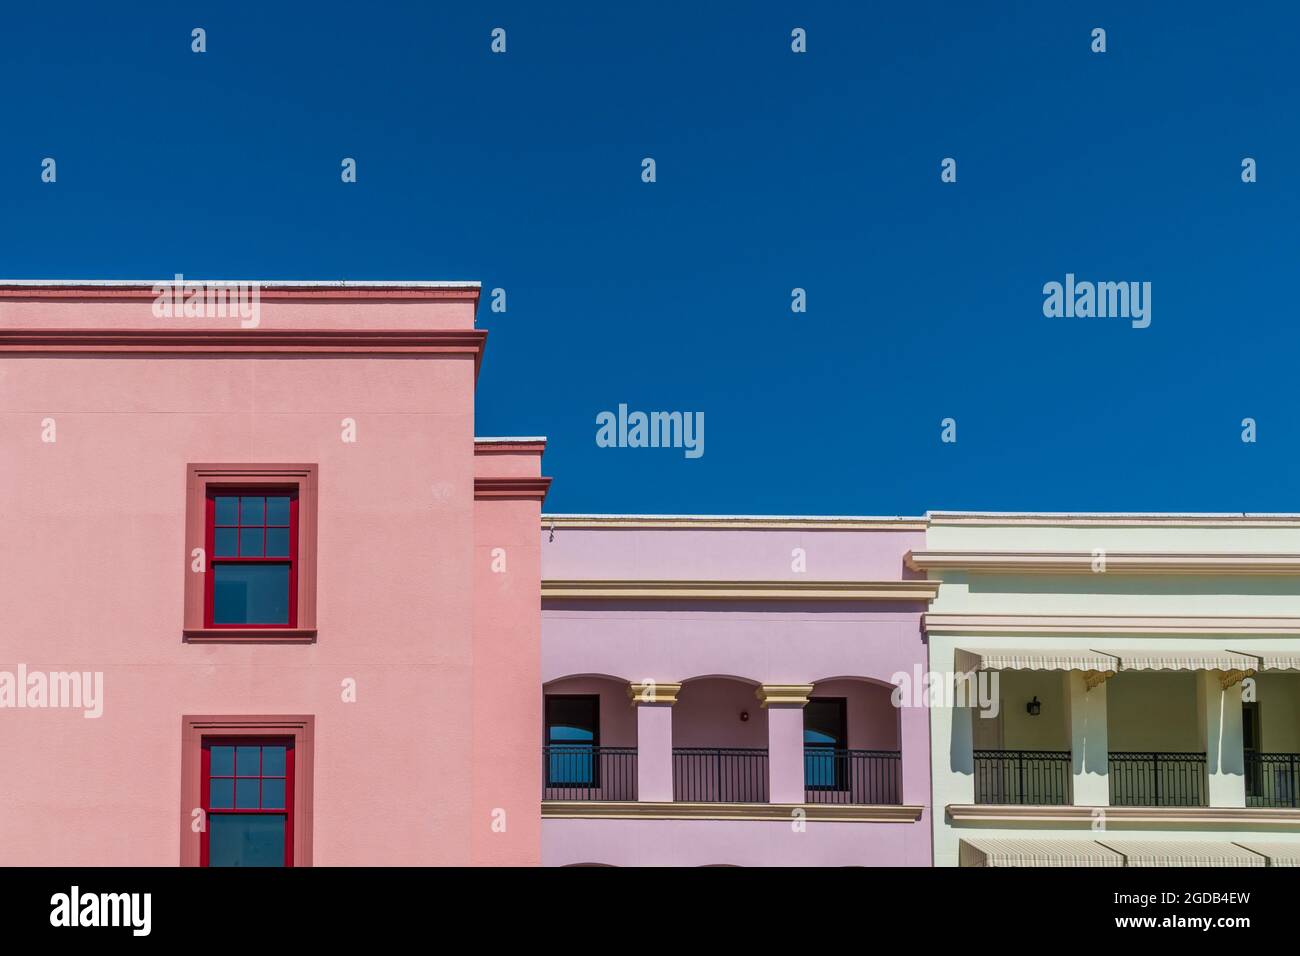 Colorful building facades against deep, bright blue sky Stock Photo